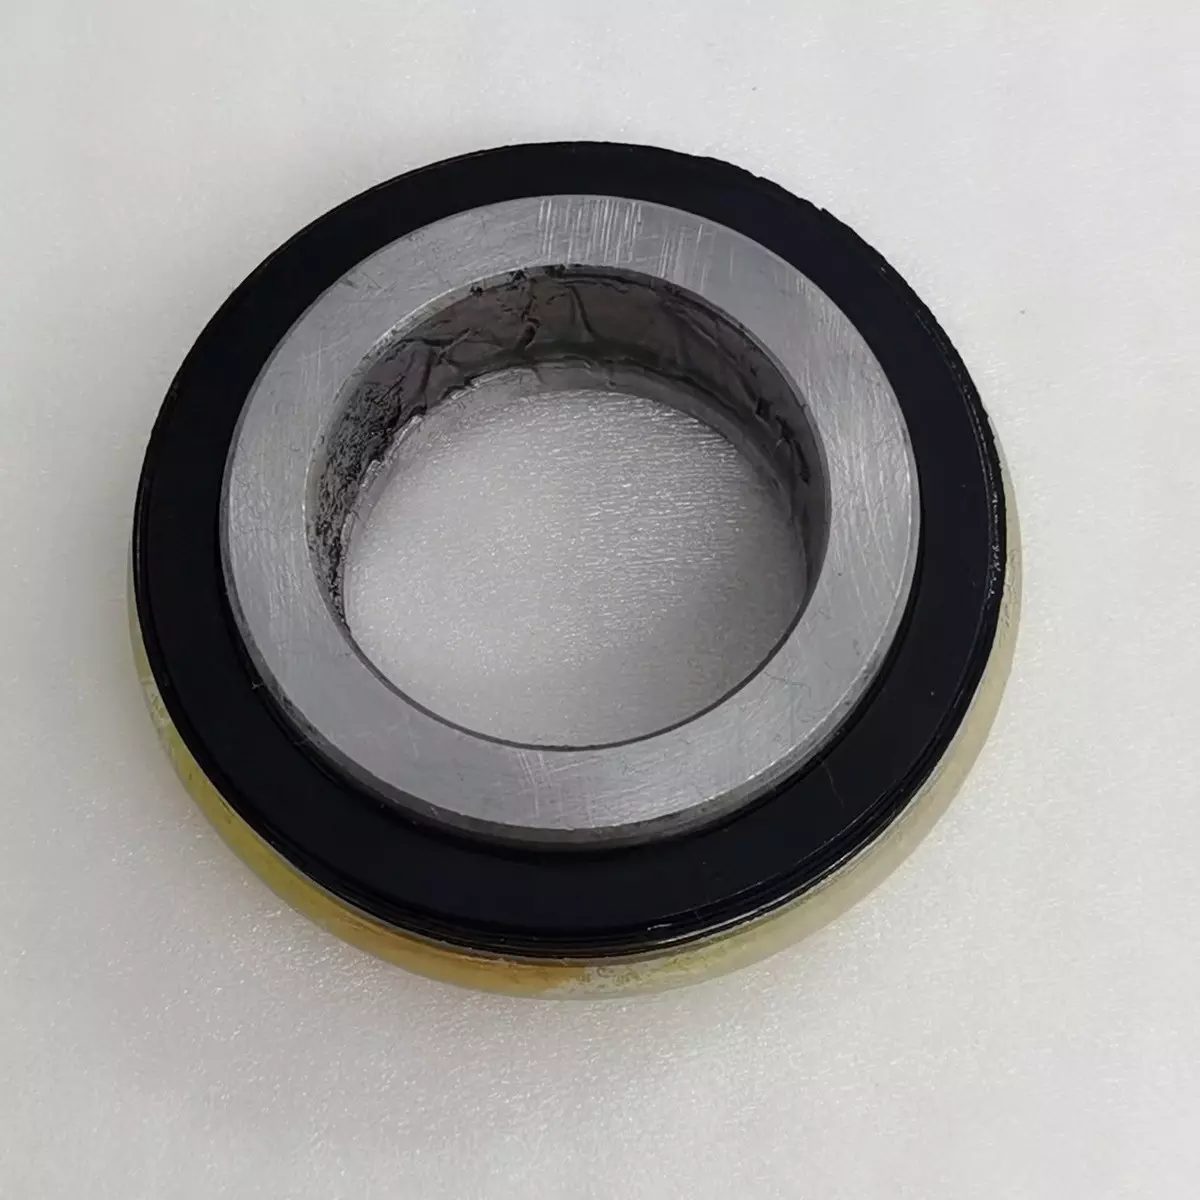 DAYANG Spare Parts Custom Production Tricycle 3 Wheel Motorcycle 698909 Bearing for Sale China Top Quality High-quality CN;CHO